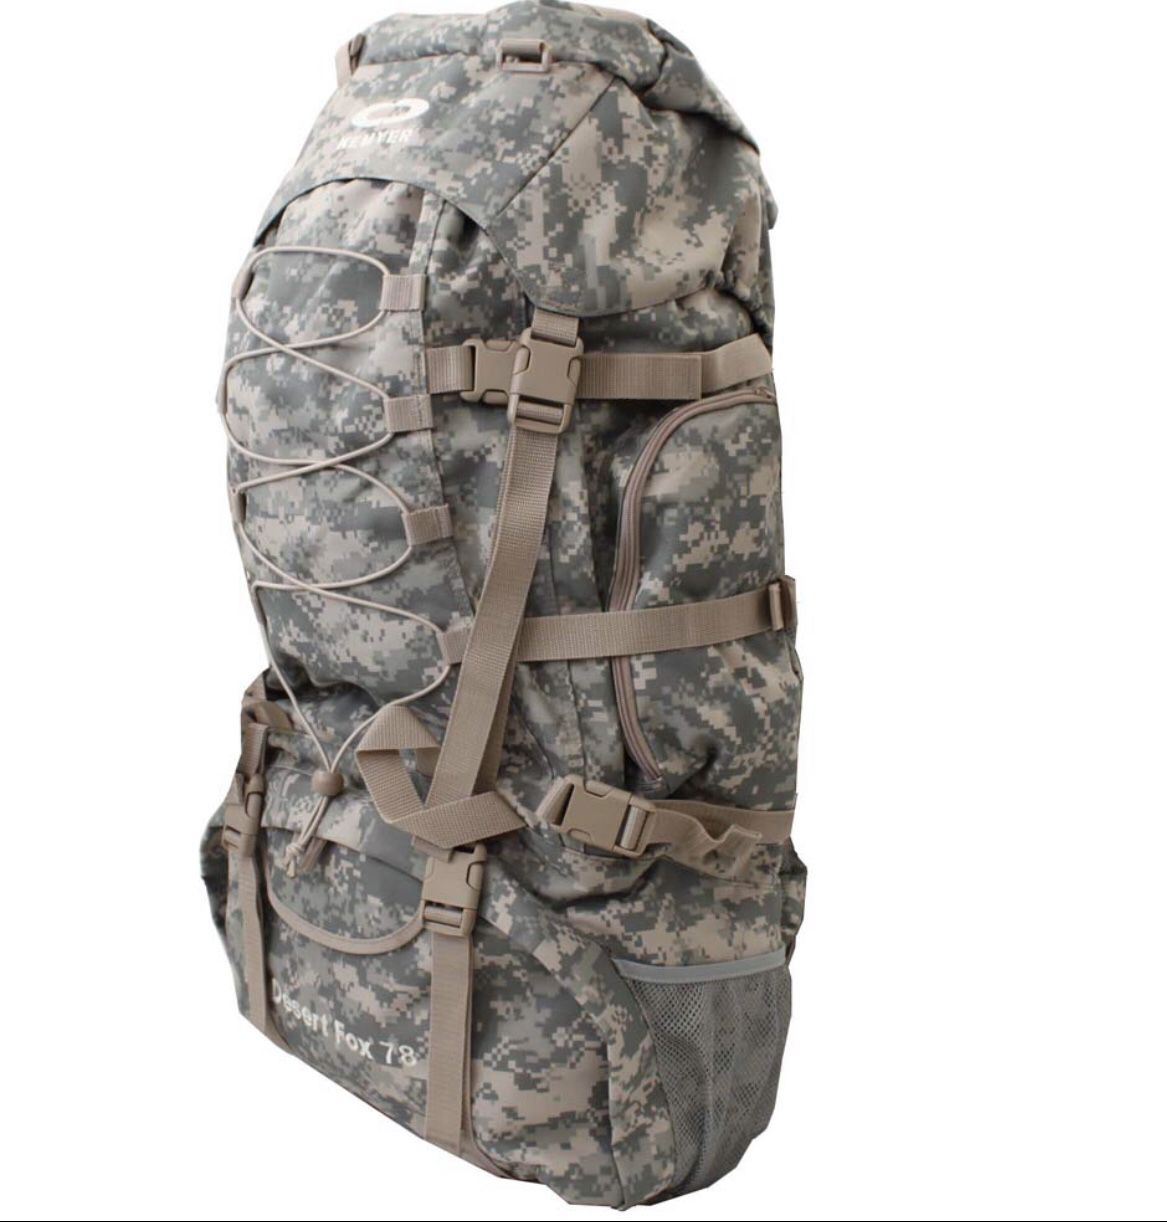 # 28 Kemyer 7100 Cubic Inches Deluxe Hiking Backpack - Army Camo 